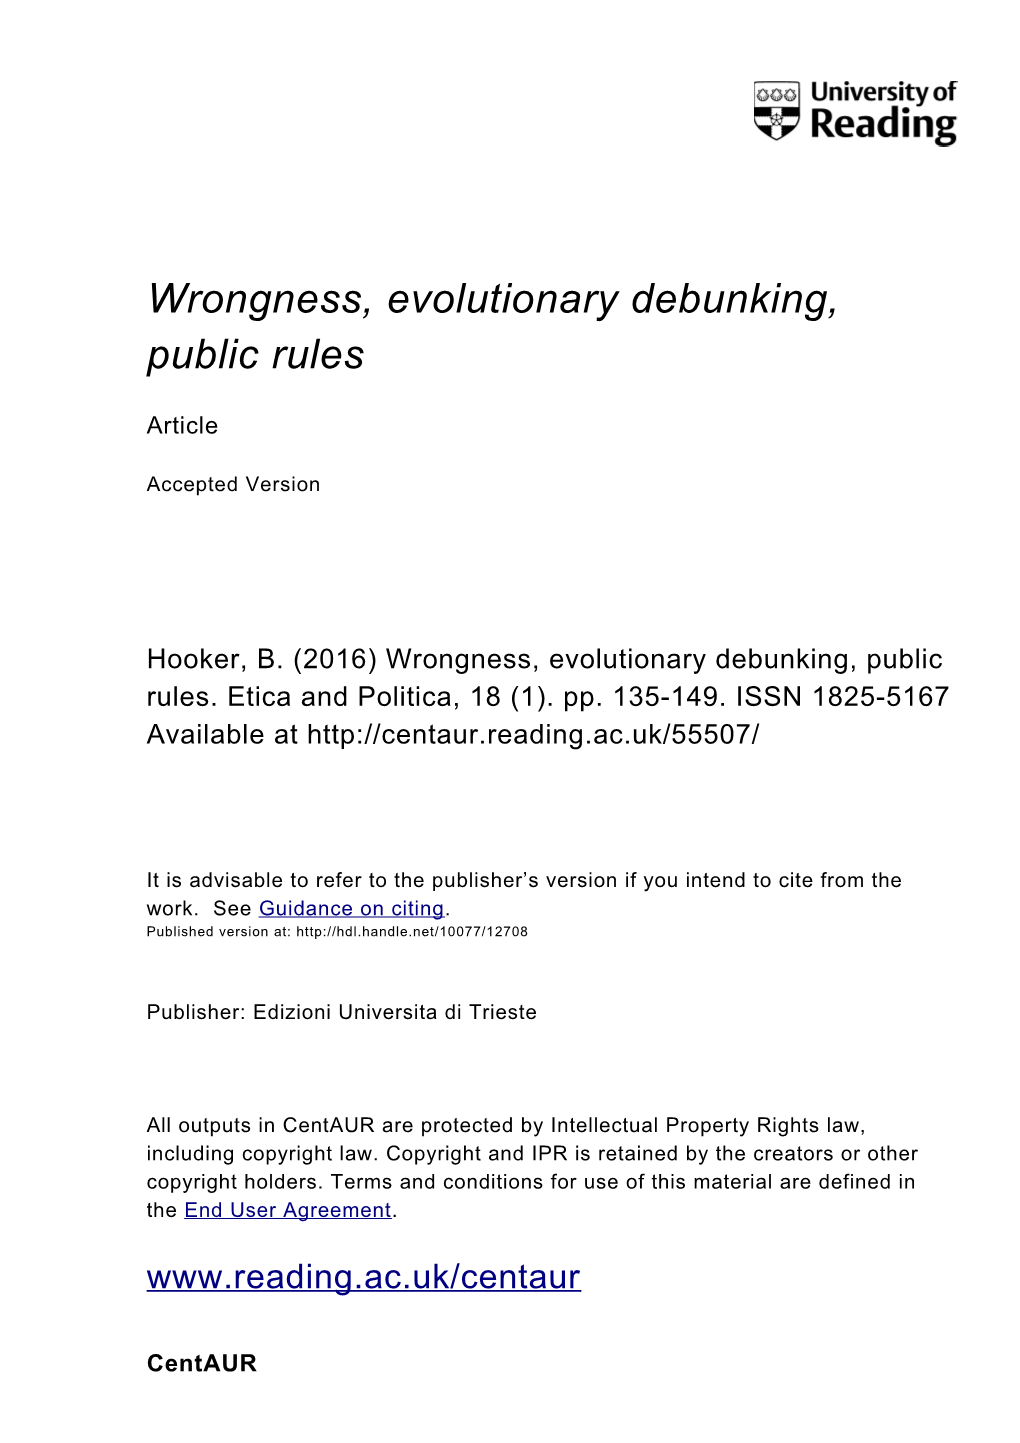 Wrongness, Evolutionary Debunking, Public Rules